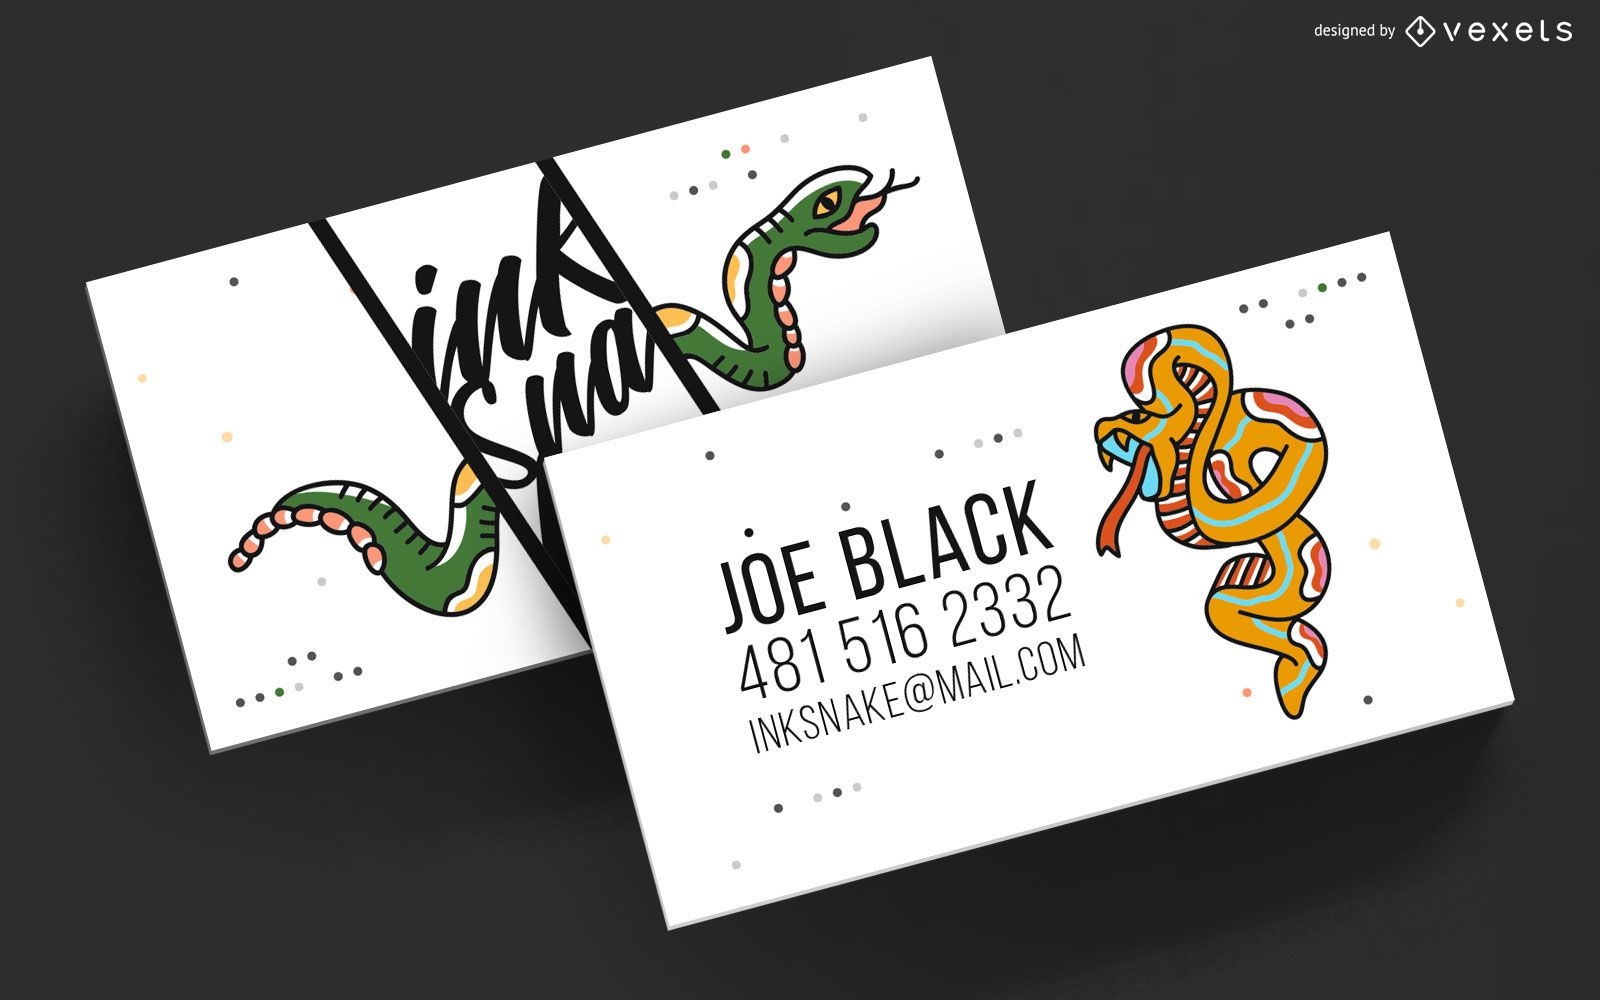 Fun Tattoo Business Cards by Thomas Taylor on Dribbble